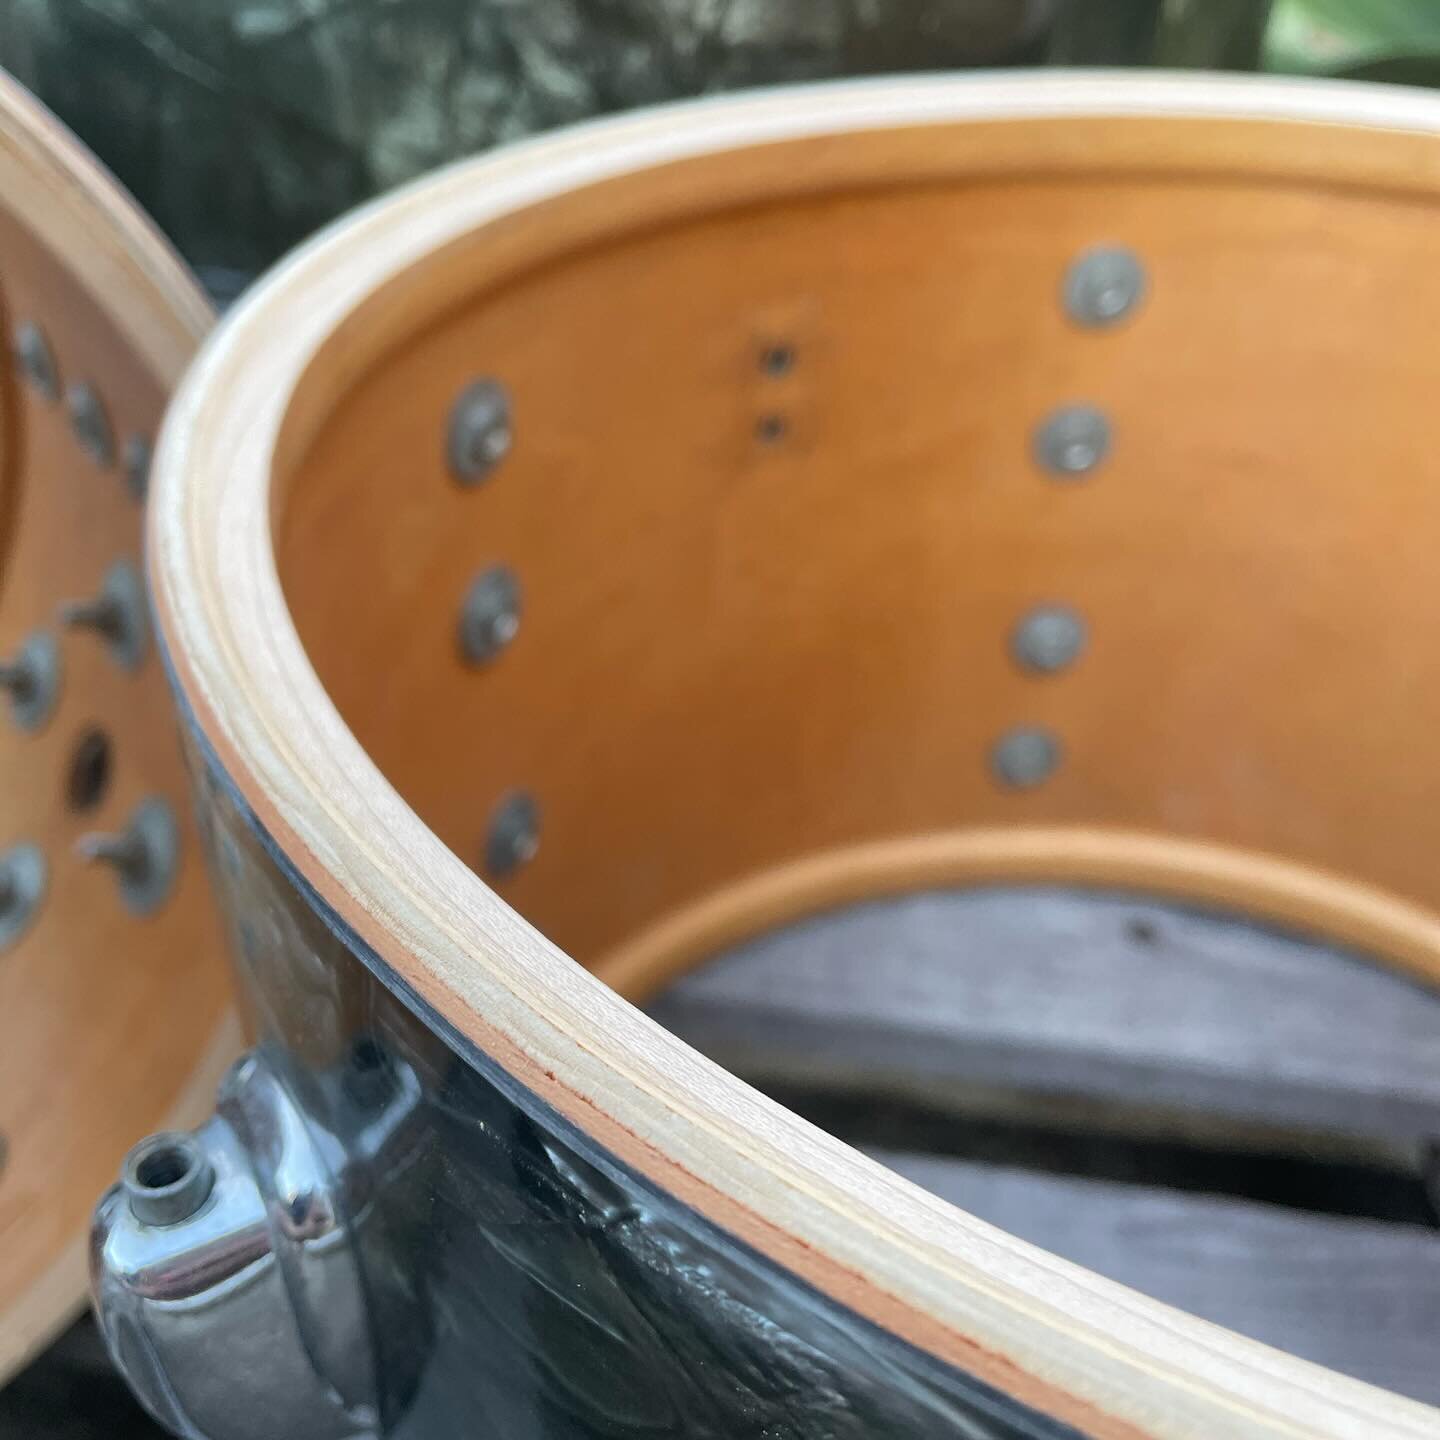 Slingerland kit stopped by for some edge correction. 
The original edges were quite worn and had a lot of filler putty which was crumbling away. 
Shells were squared off before re-cutting to original spec. Nice and tidy now and much more user friendl